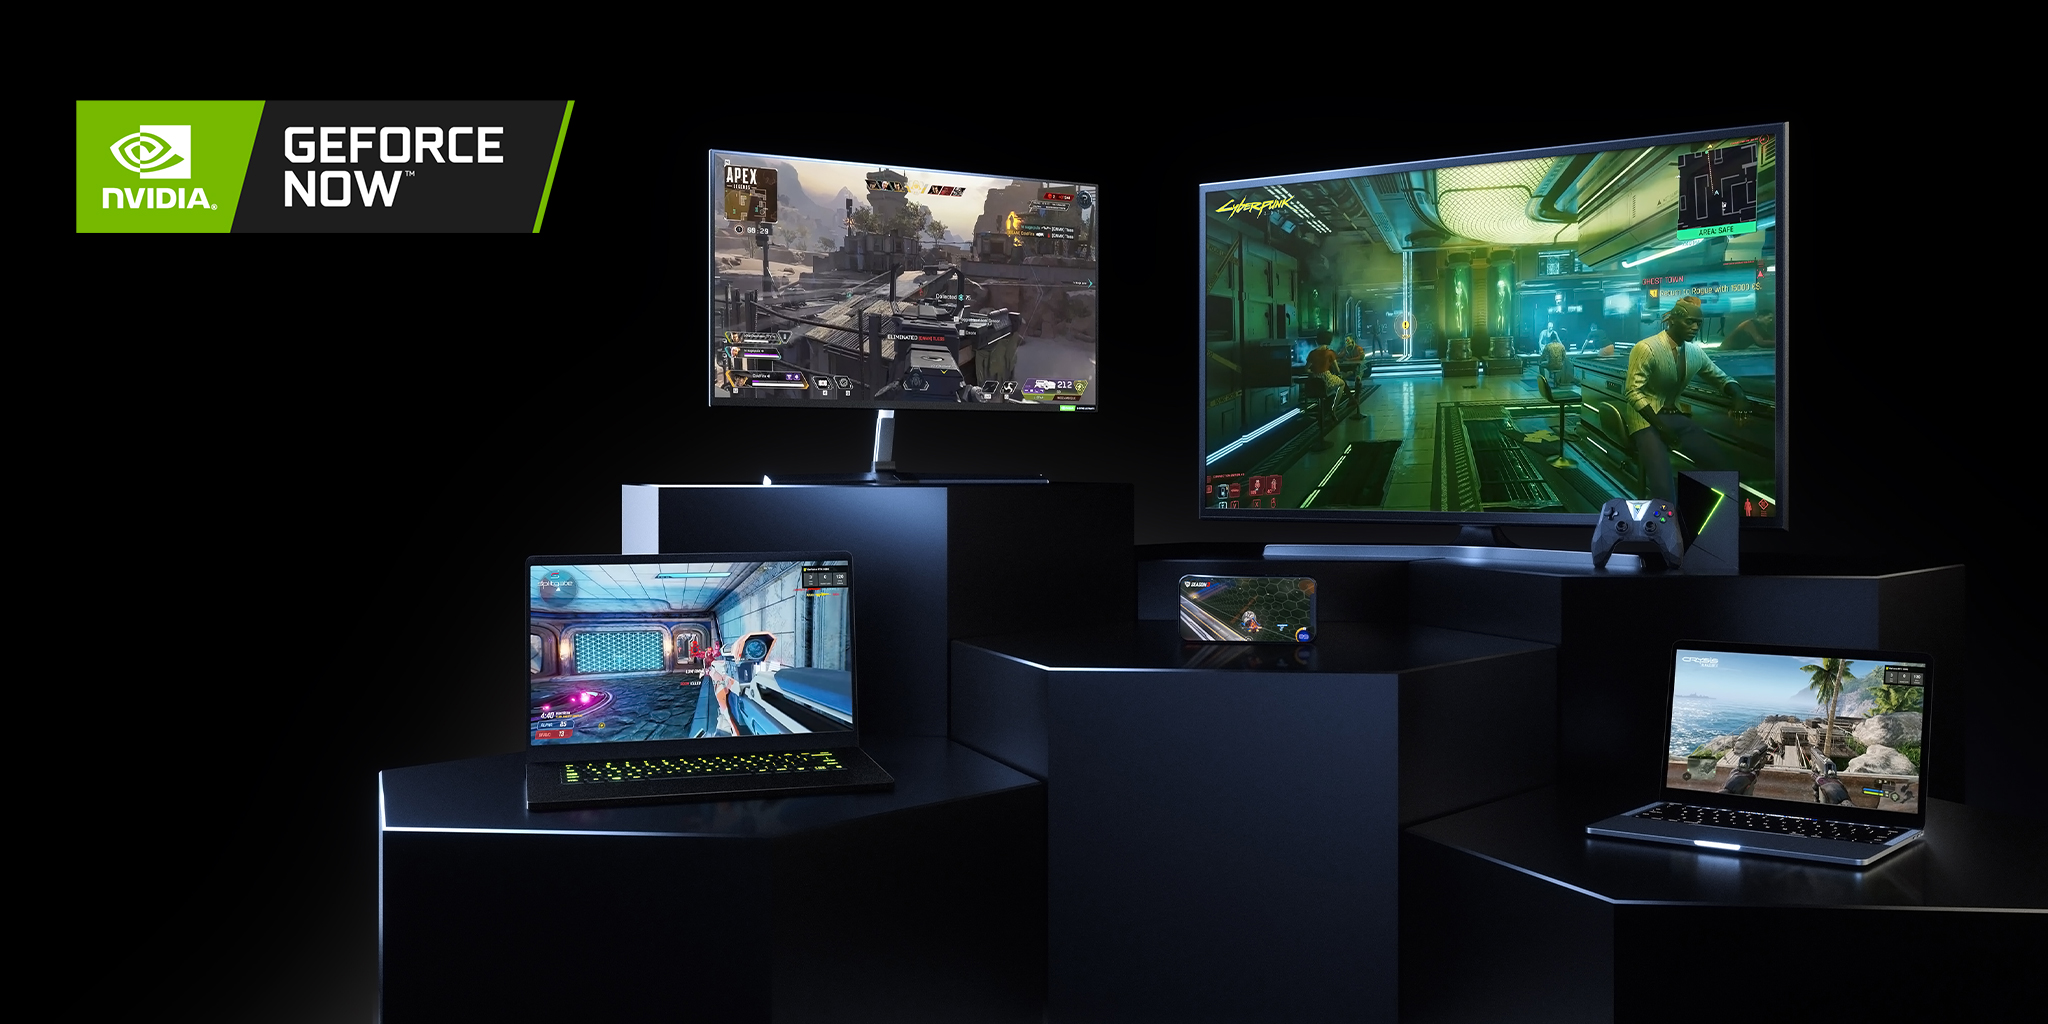 An image depicting various electronic devices including a laptop, a tablet, a mobile phone, and a television that are compatible with the NVIDIA GeForce Now cloud streaming service for video games.